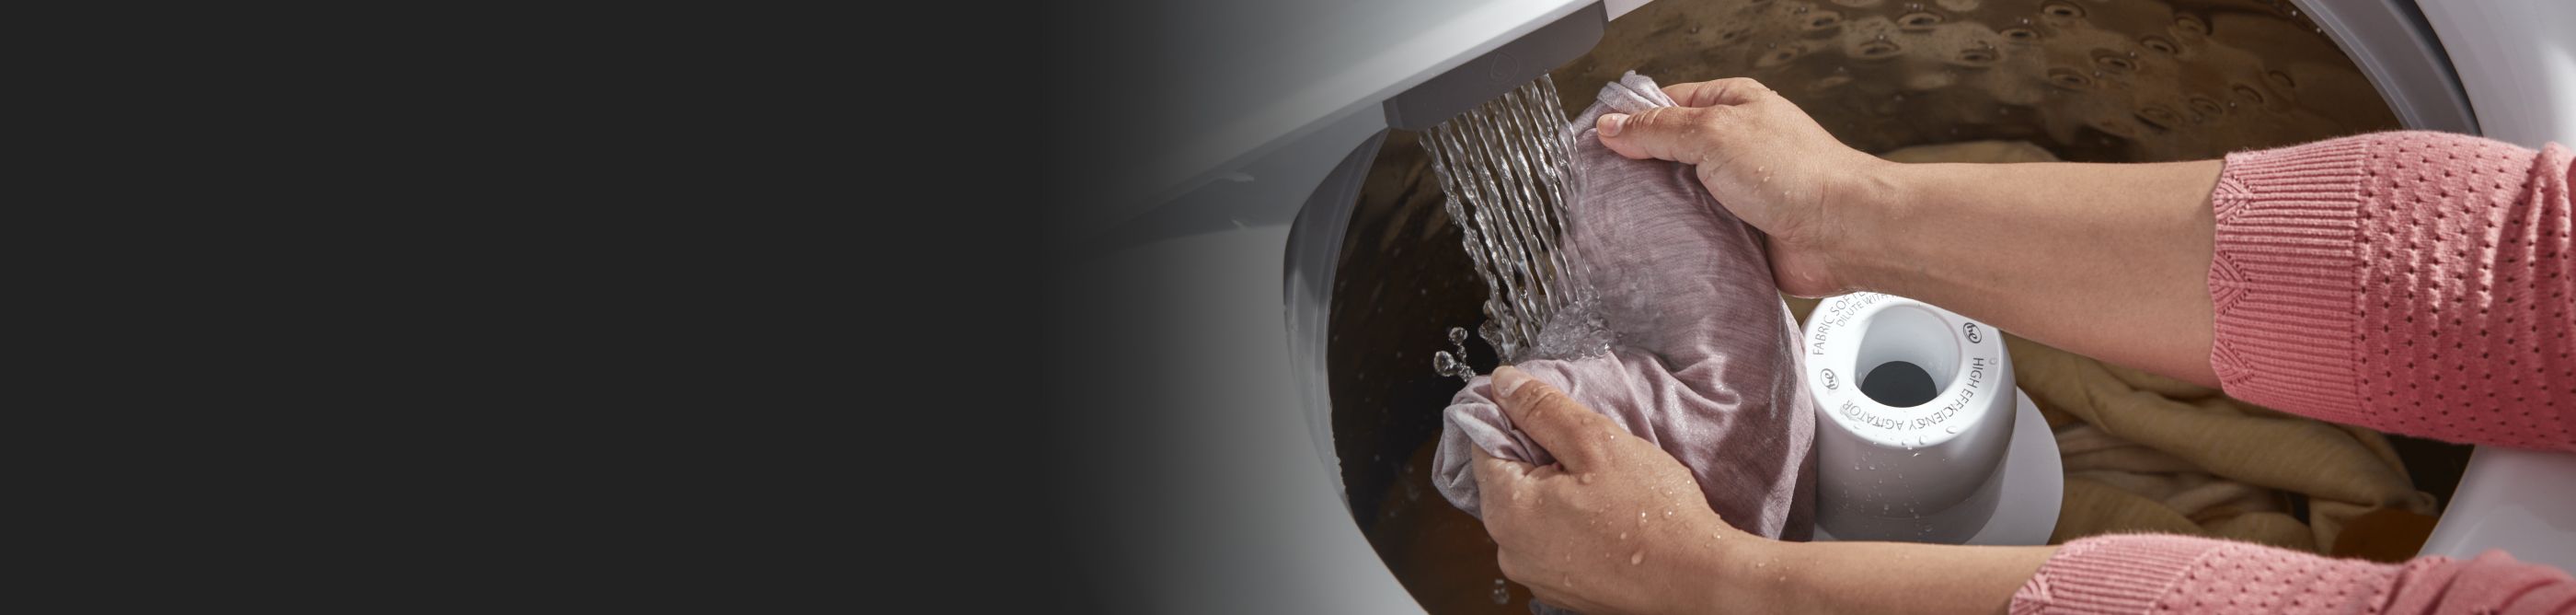 Person hand-rinsing laundry in a Whirlpool® Top-Load Washer